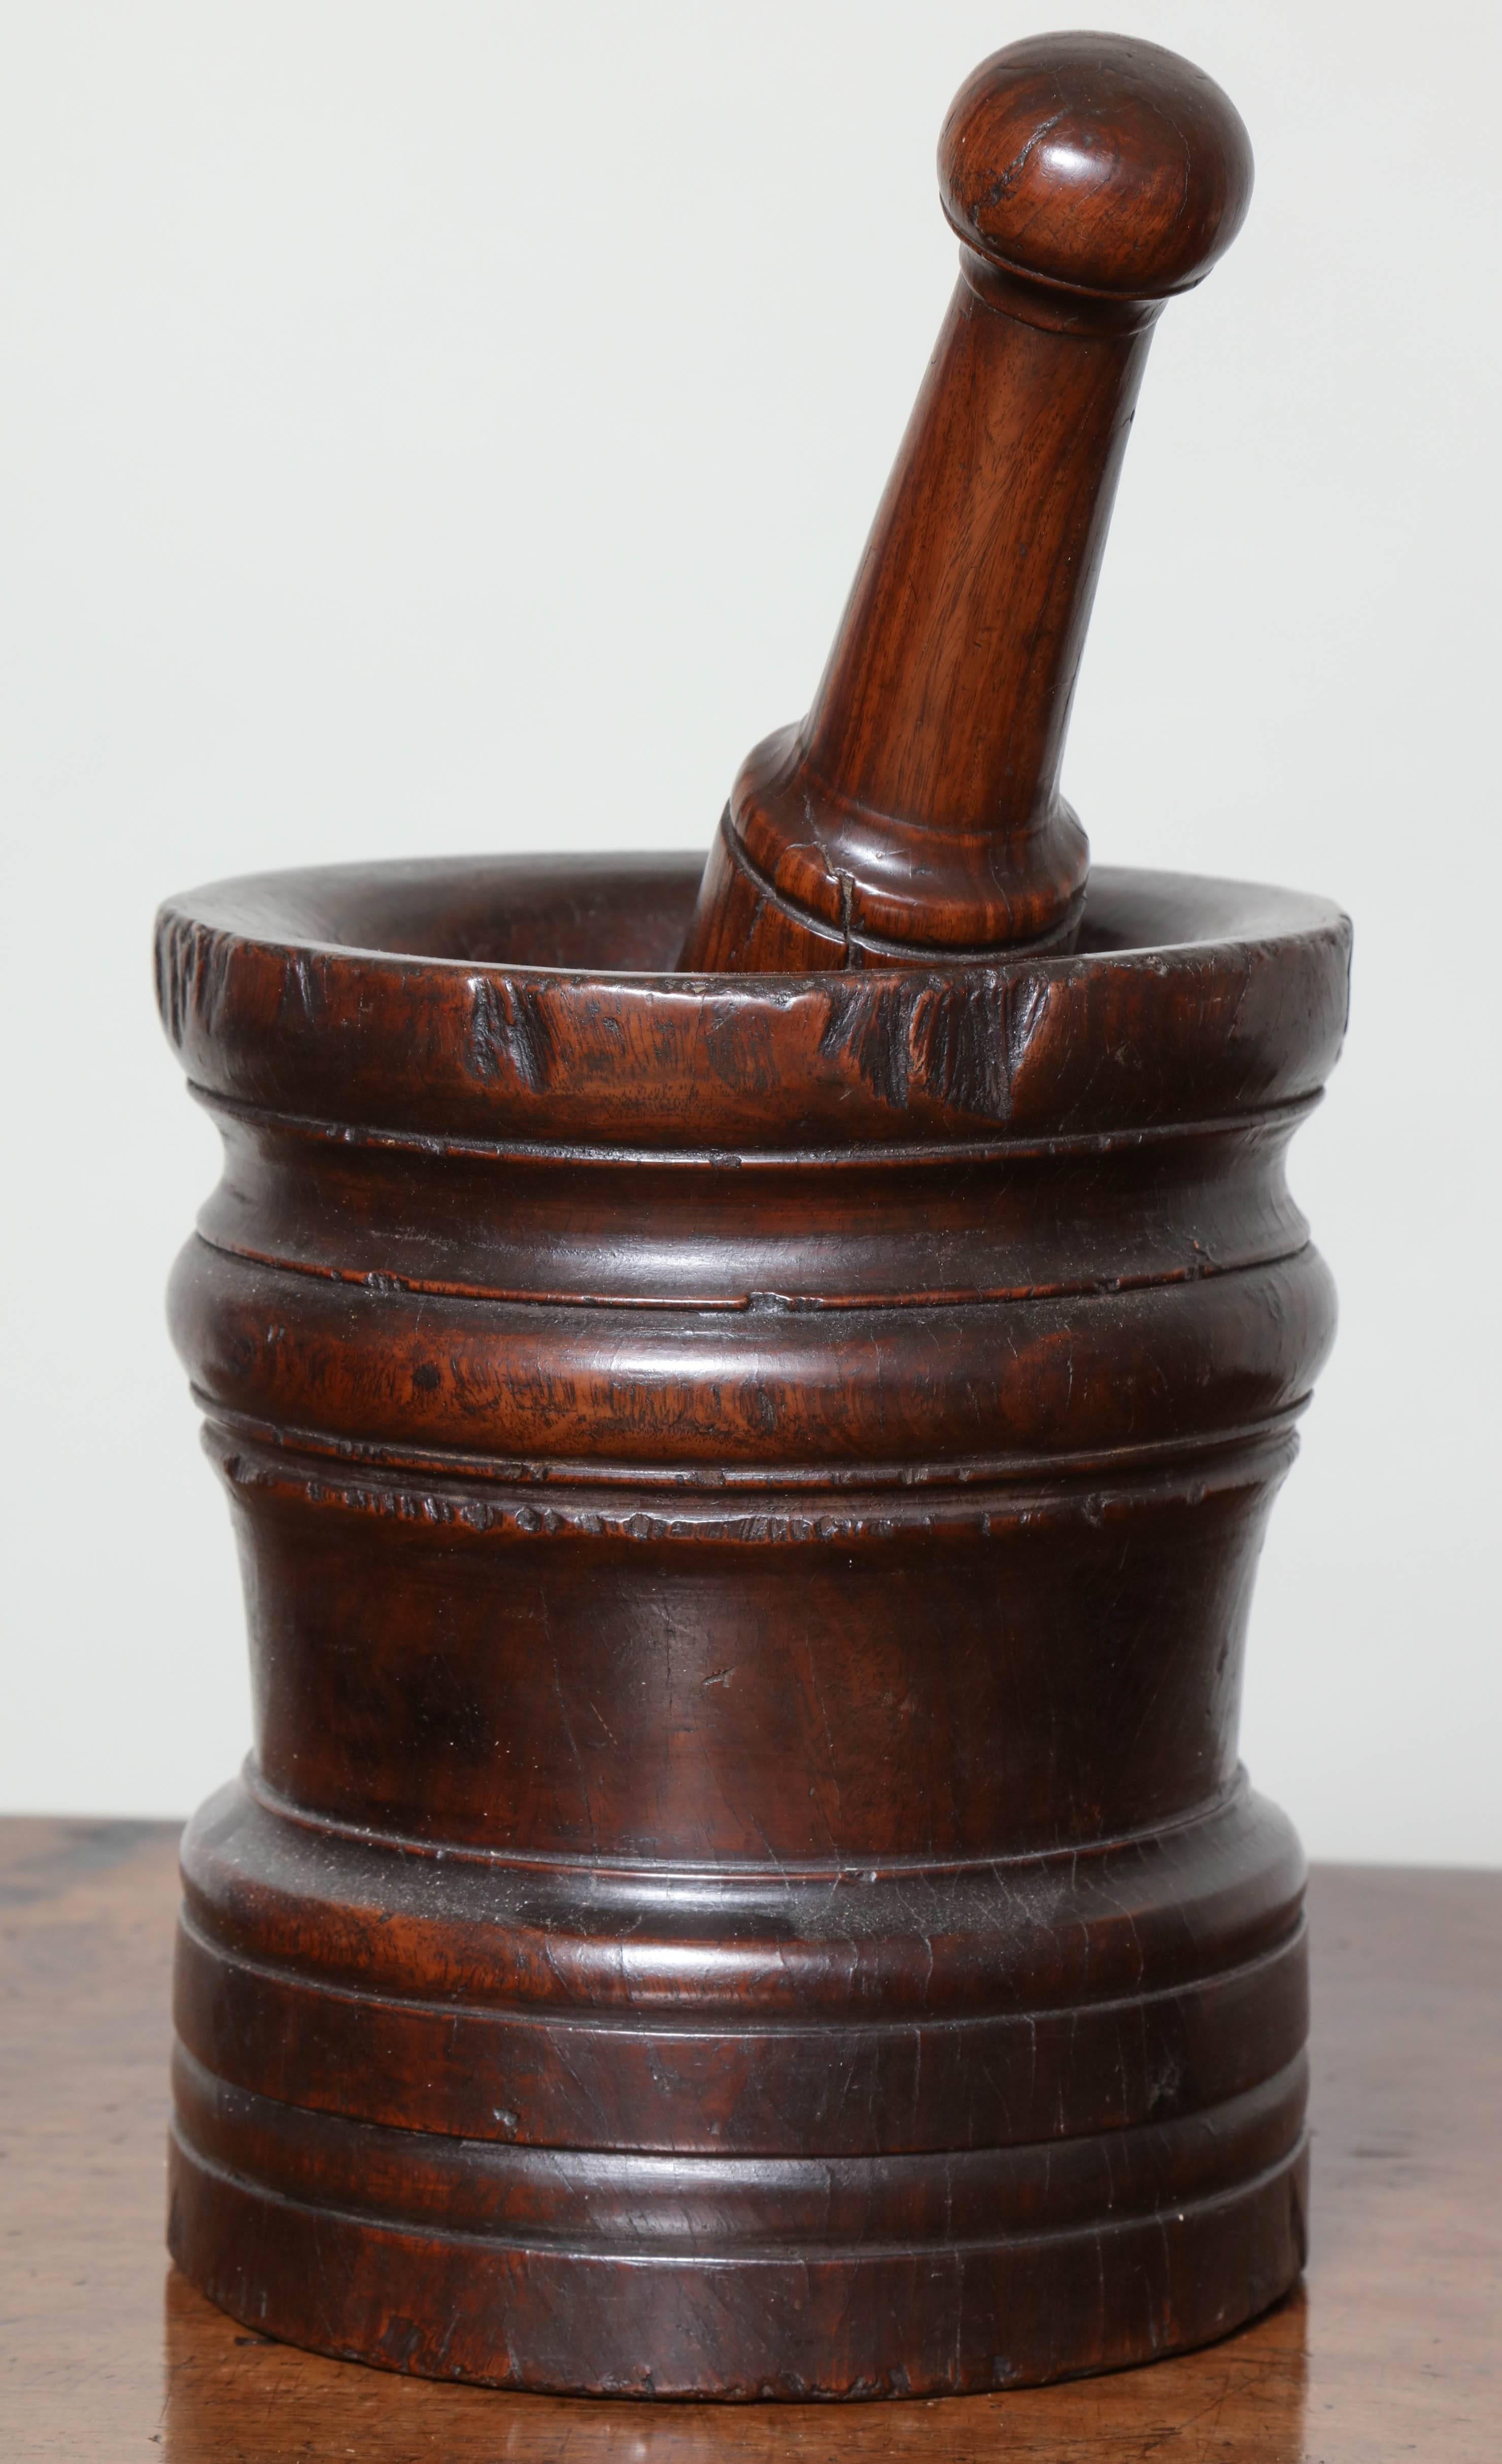 Good 18th century English turned lignum vitae mortar and pestle retaining great color and of pleasing proportions.